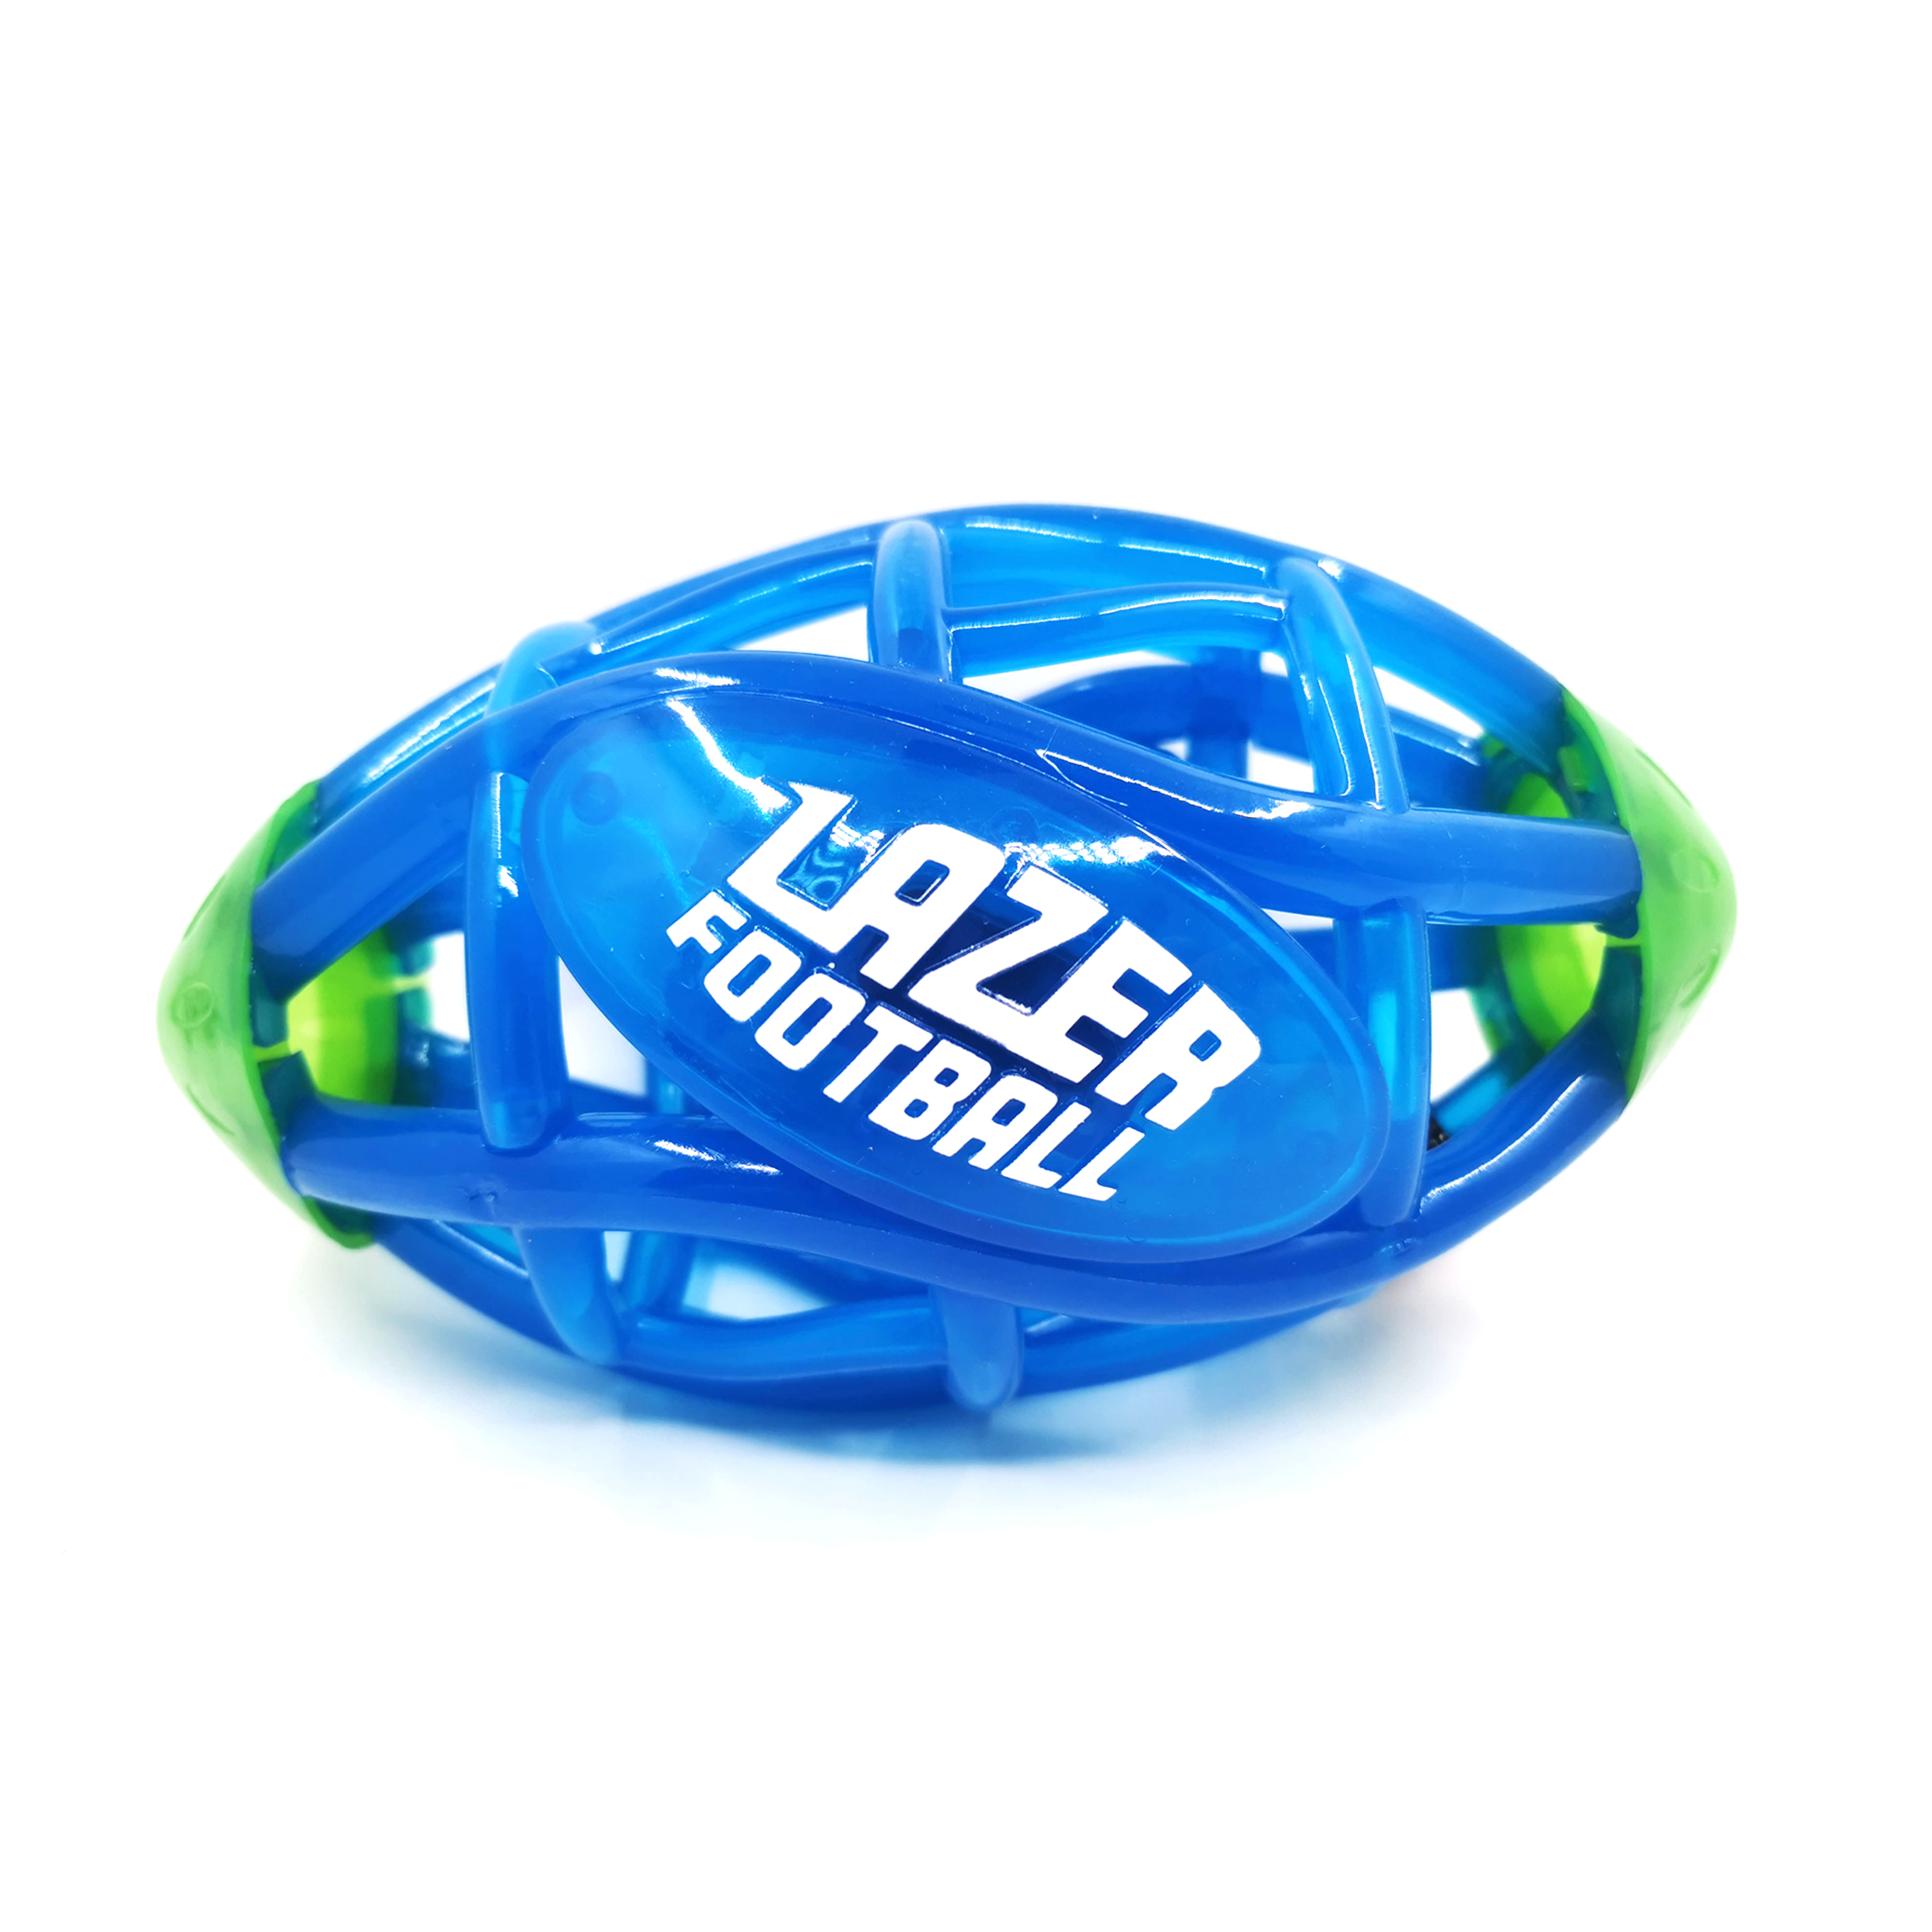 Lazer Light Up Glow Rubber Toy Football, Green and Blue, Pee Wee Size 3 - image 2 of 5